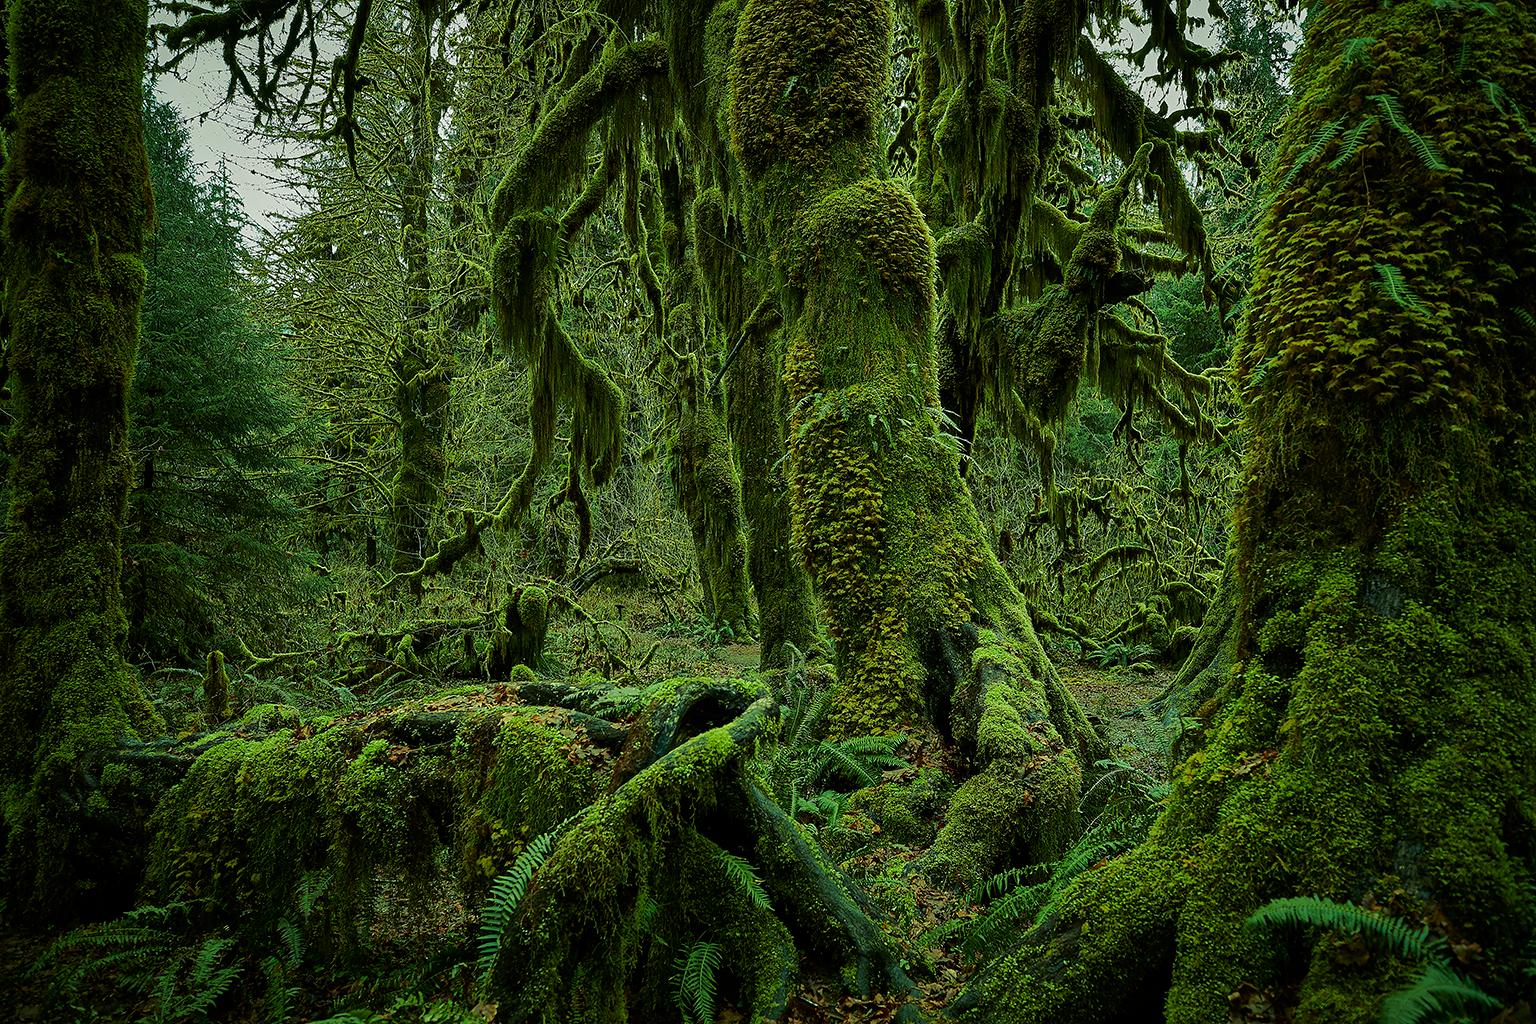 Olympic National Park No. 4, Washington State, 2018, Archival Pigment Print. Edition of 7 with 2 Artist Proofs.
Signed, Dated and Numbered.

Chris Gordaneer is one of the most passionate photographers of our time. His photography is at the